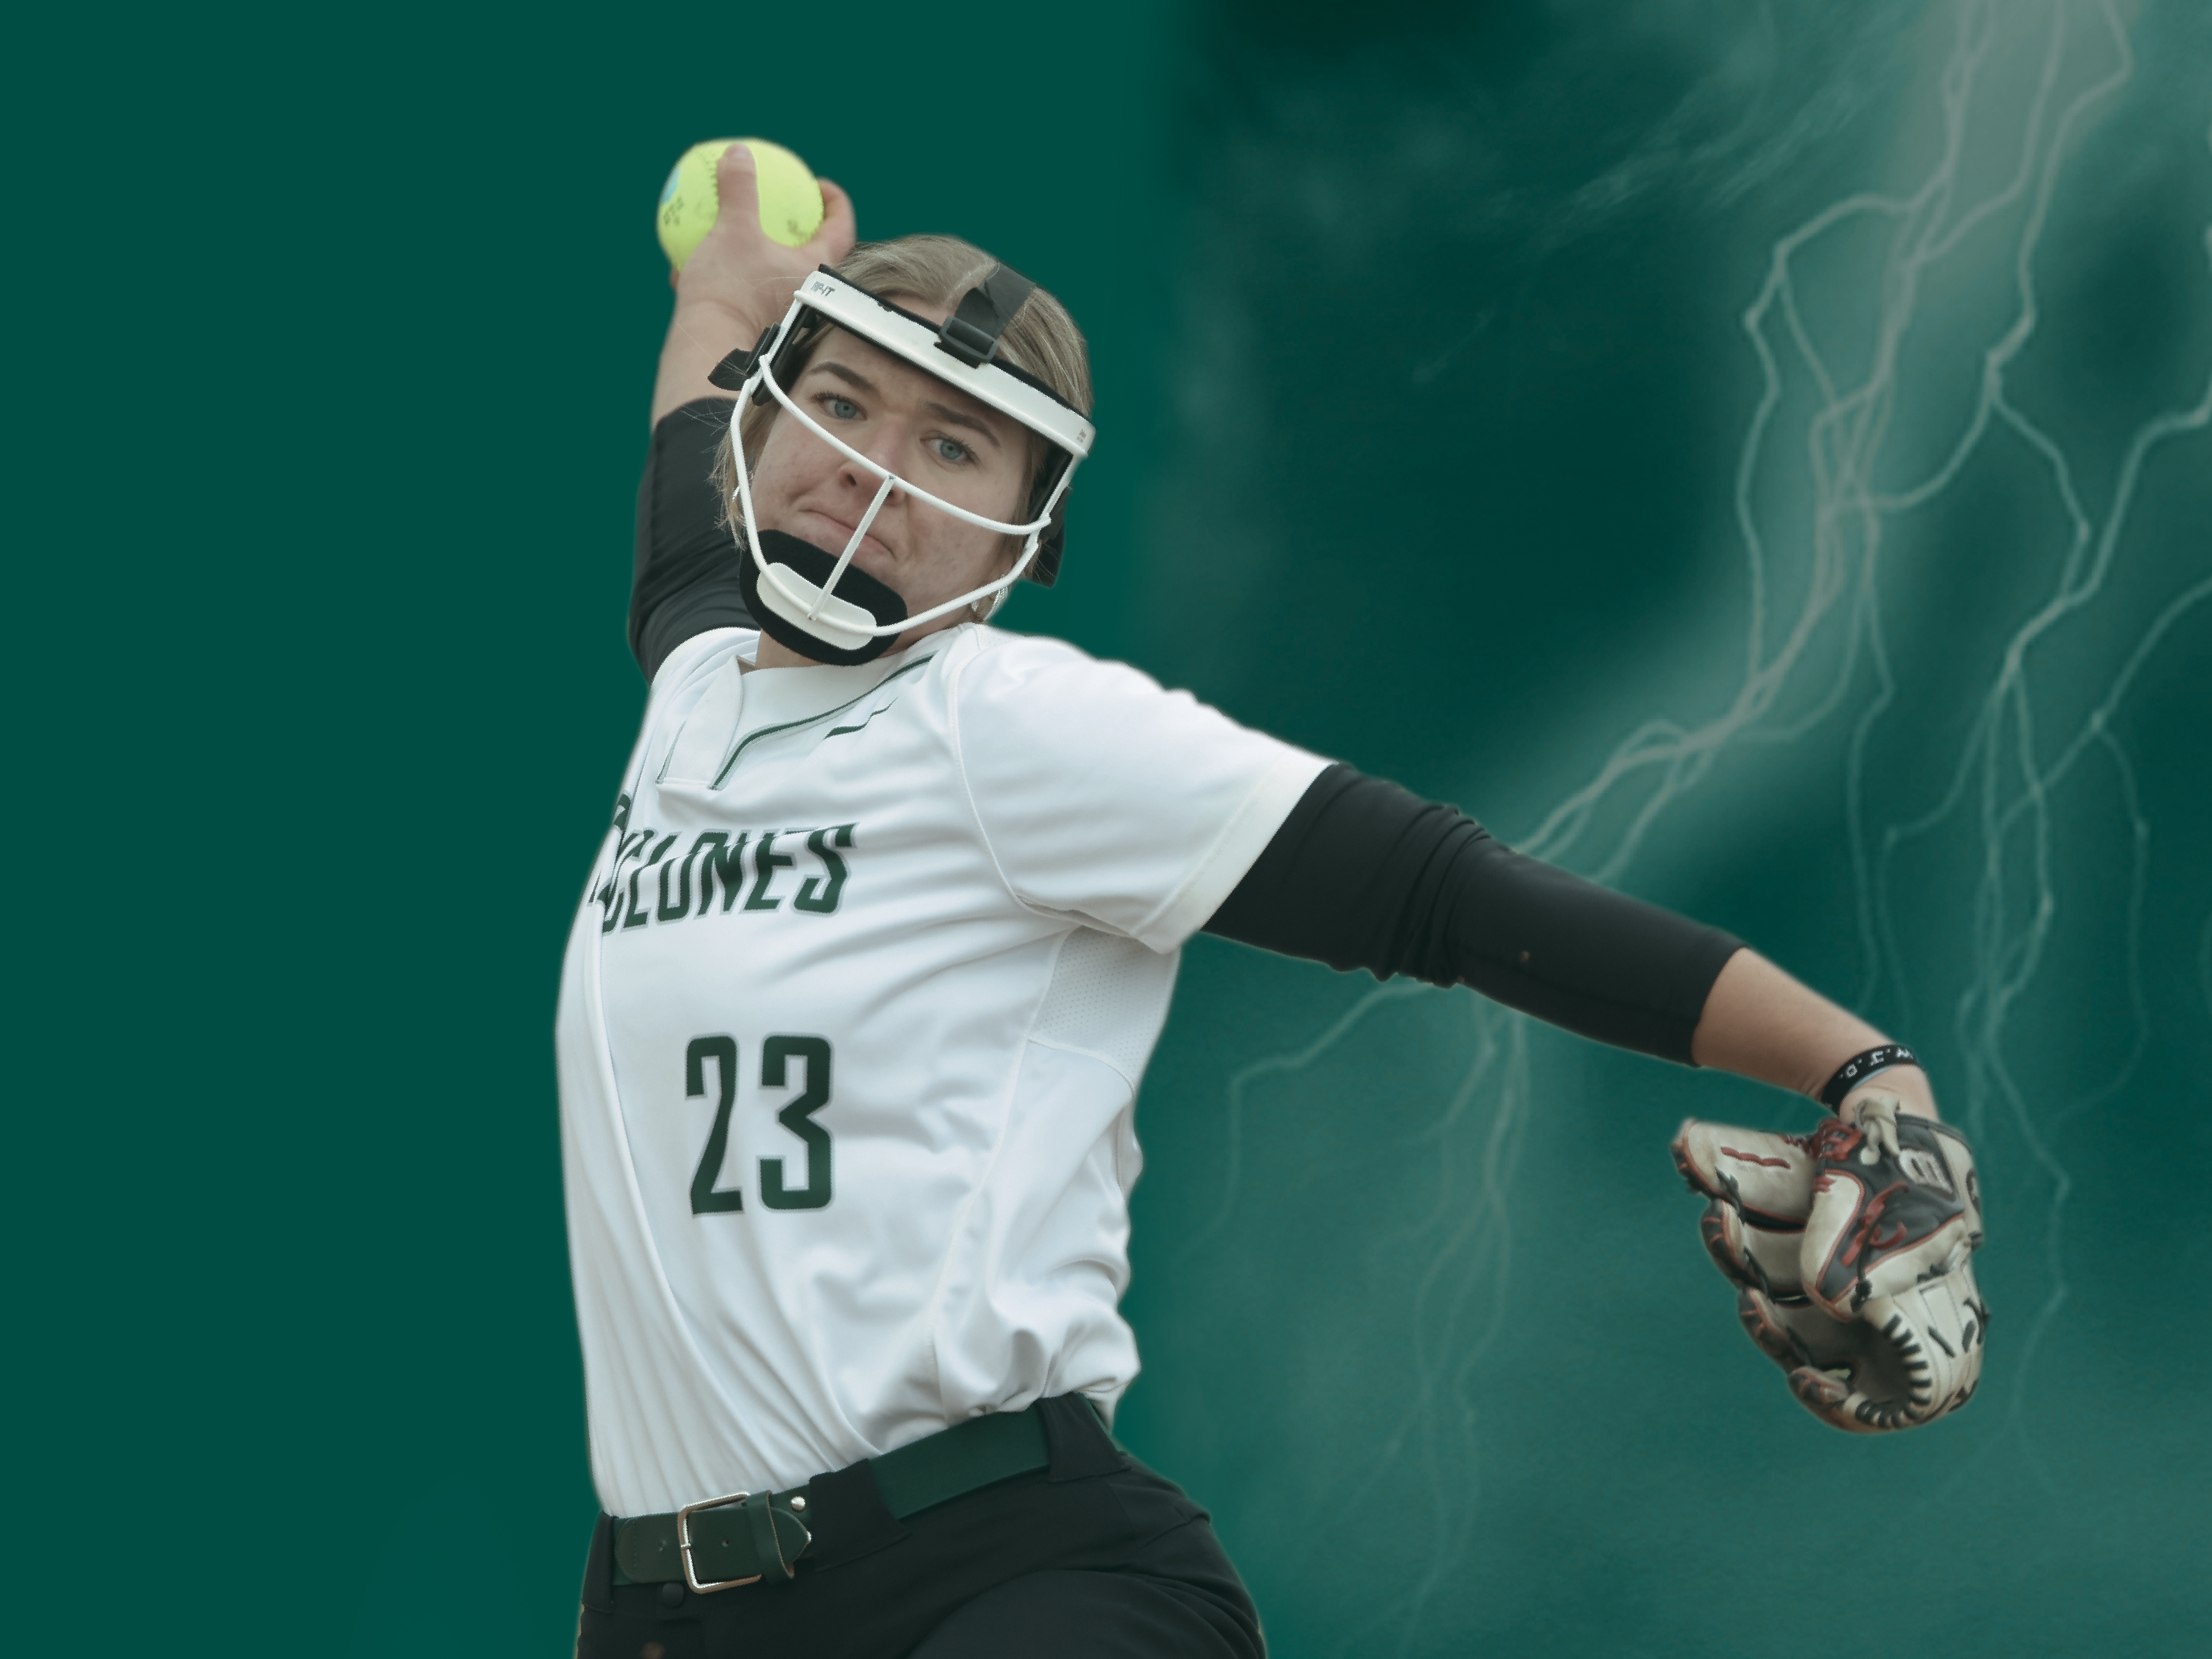 Image of softball player pitching a ball with lightning graphics in the background.